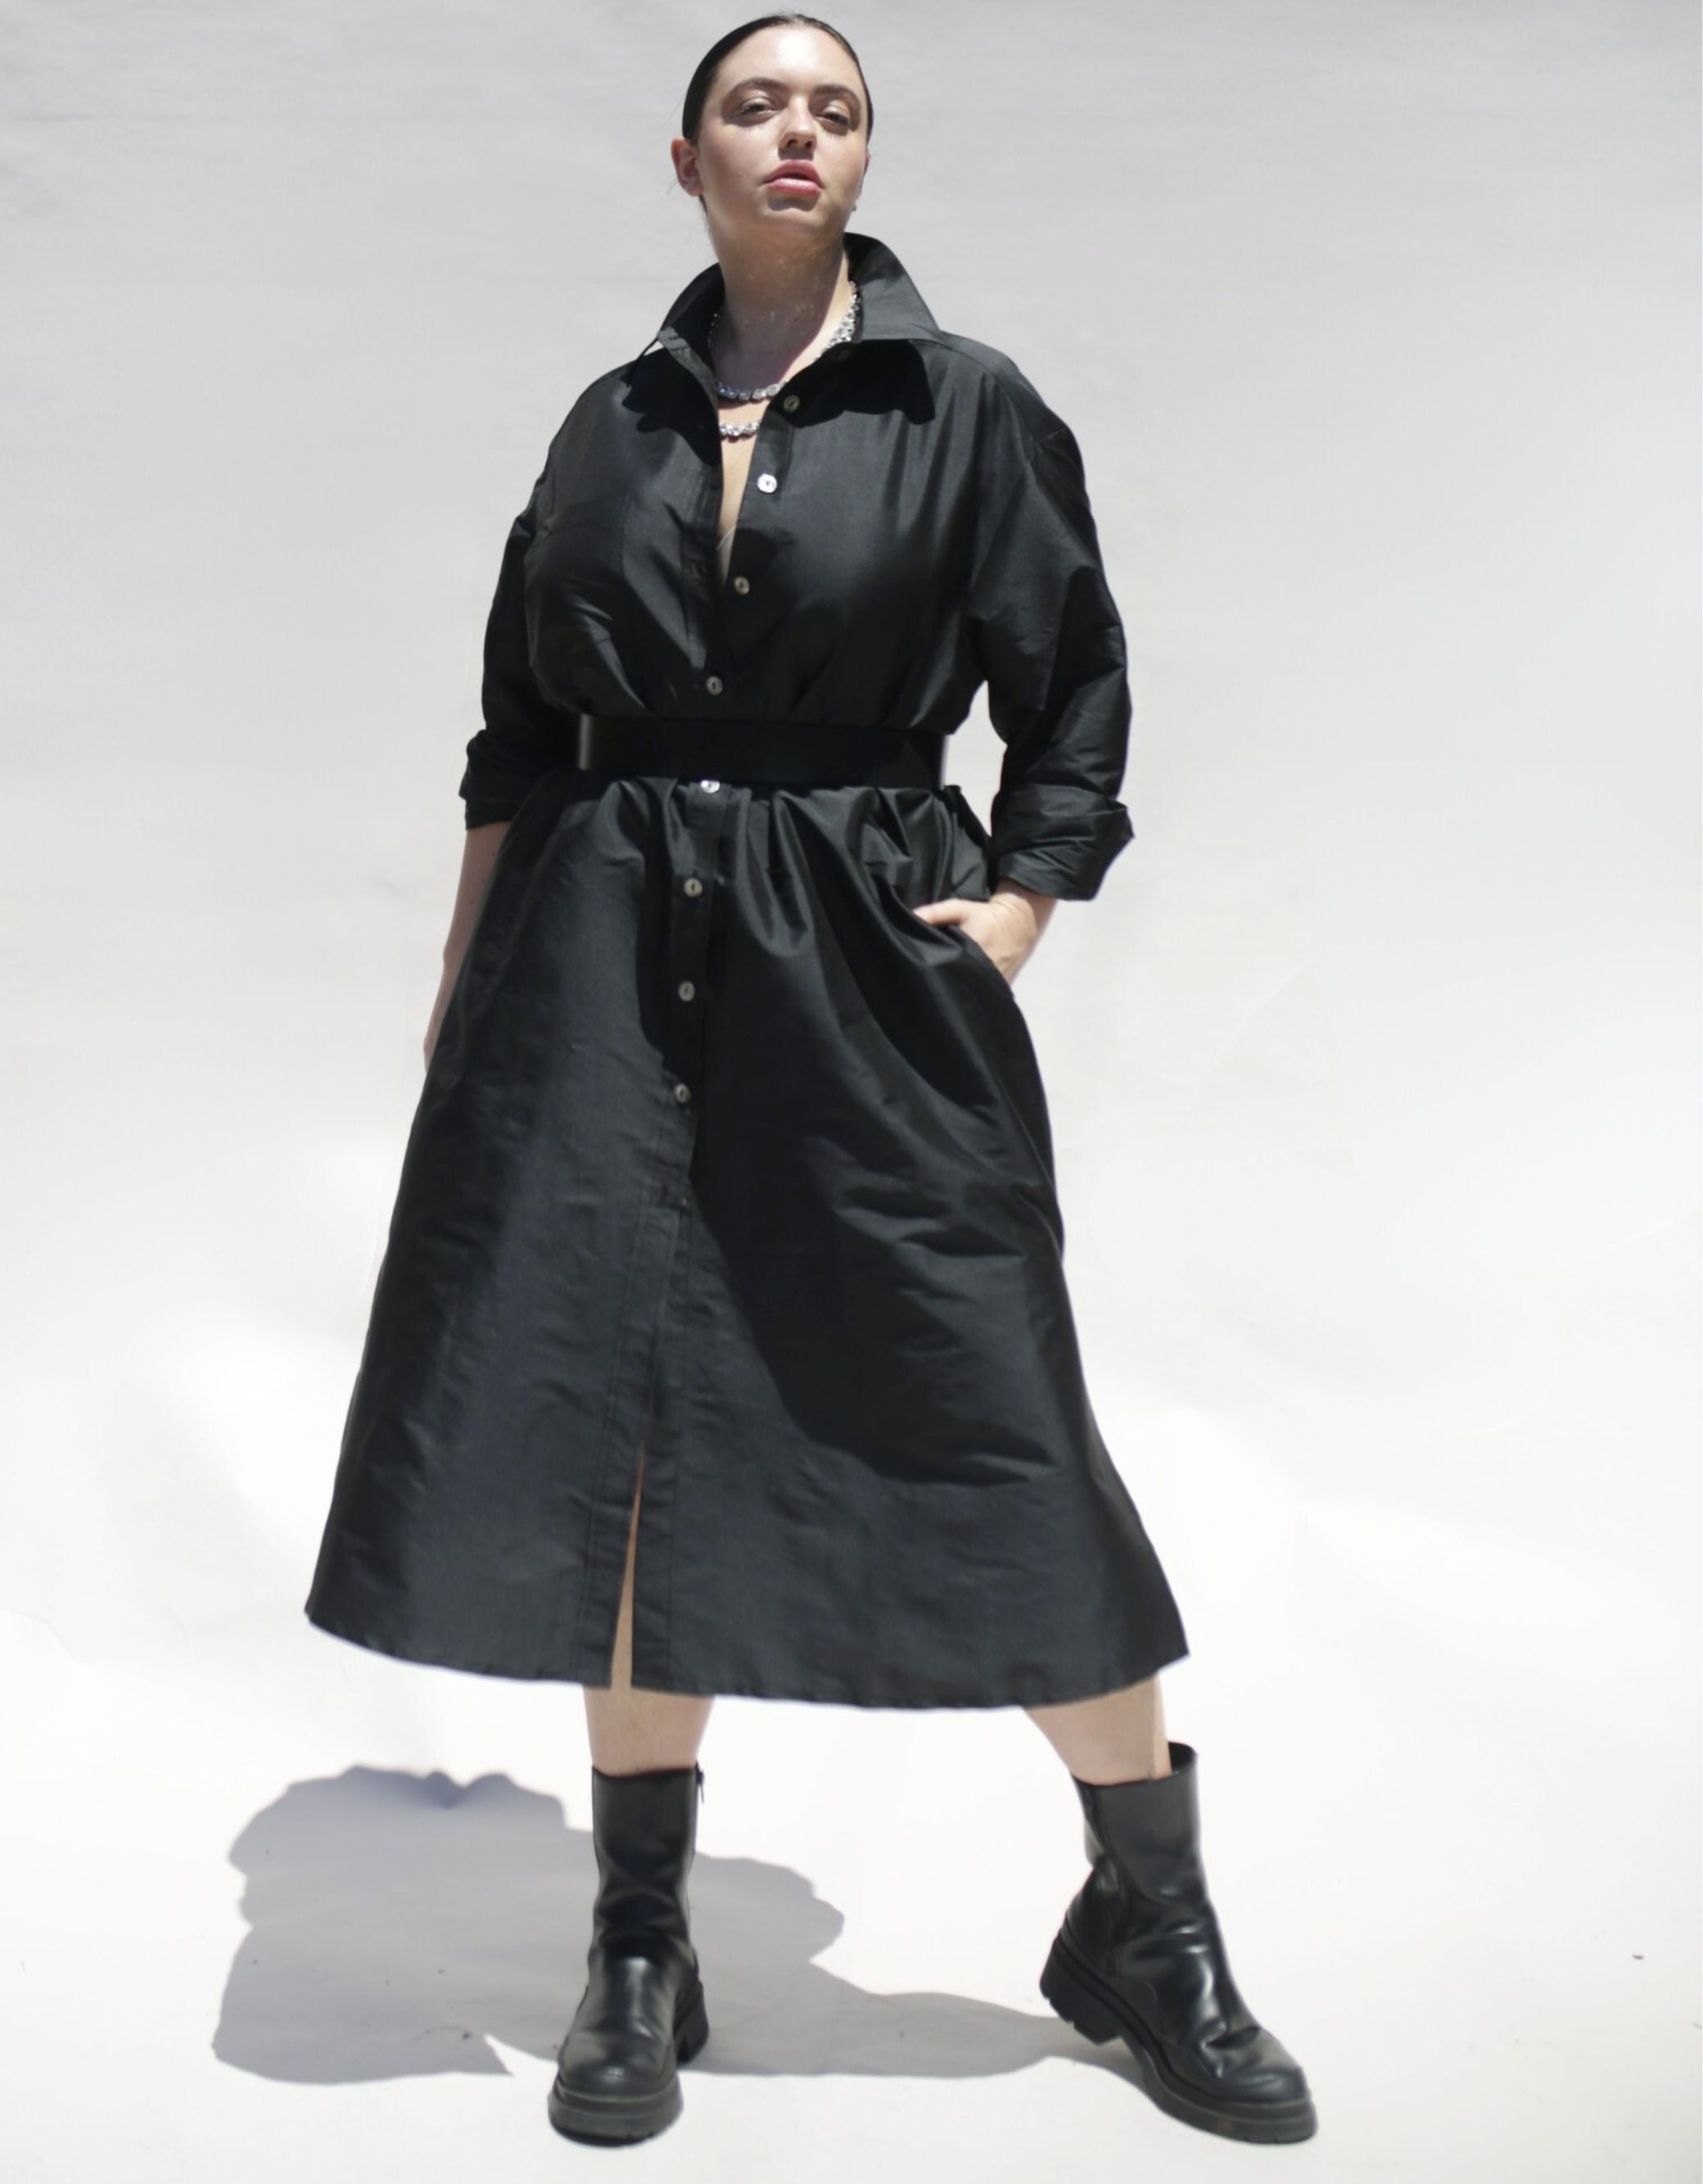 Long Dupioni Shirt Dress in Black with belt from Harness Set